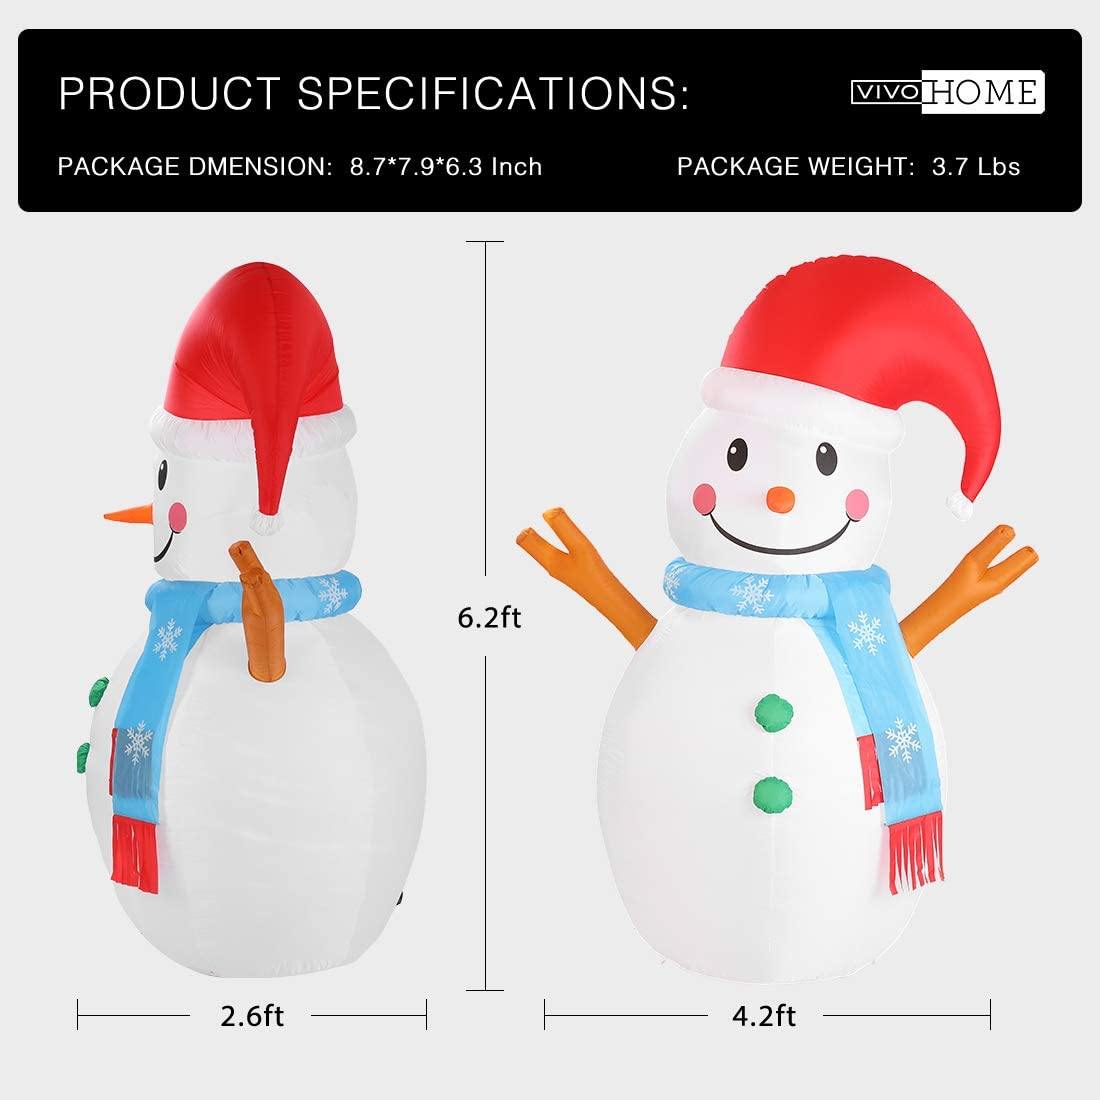 VIVOHOME 6.2ft Height Christmas Inflatable LED Lighted Snowman with Scarf and Colorful Rotating Light Outdoor Decoration - VIVOHOME